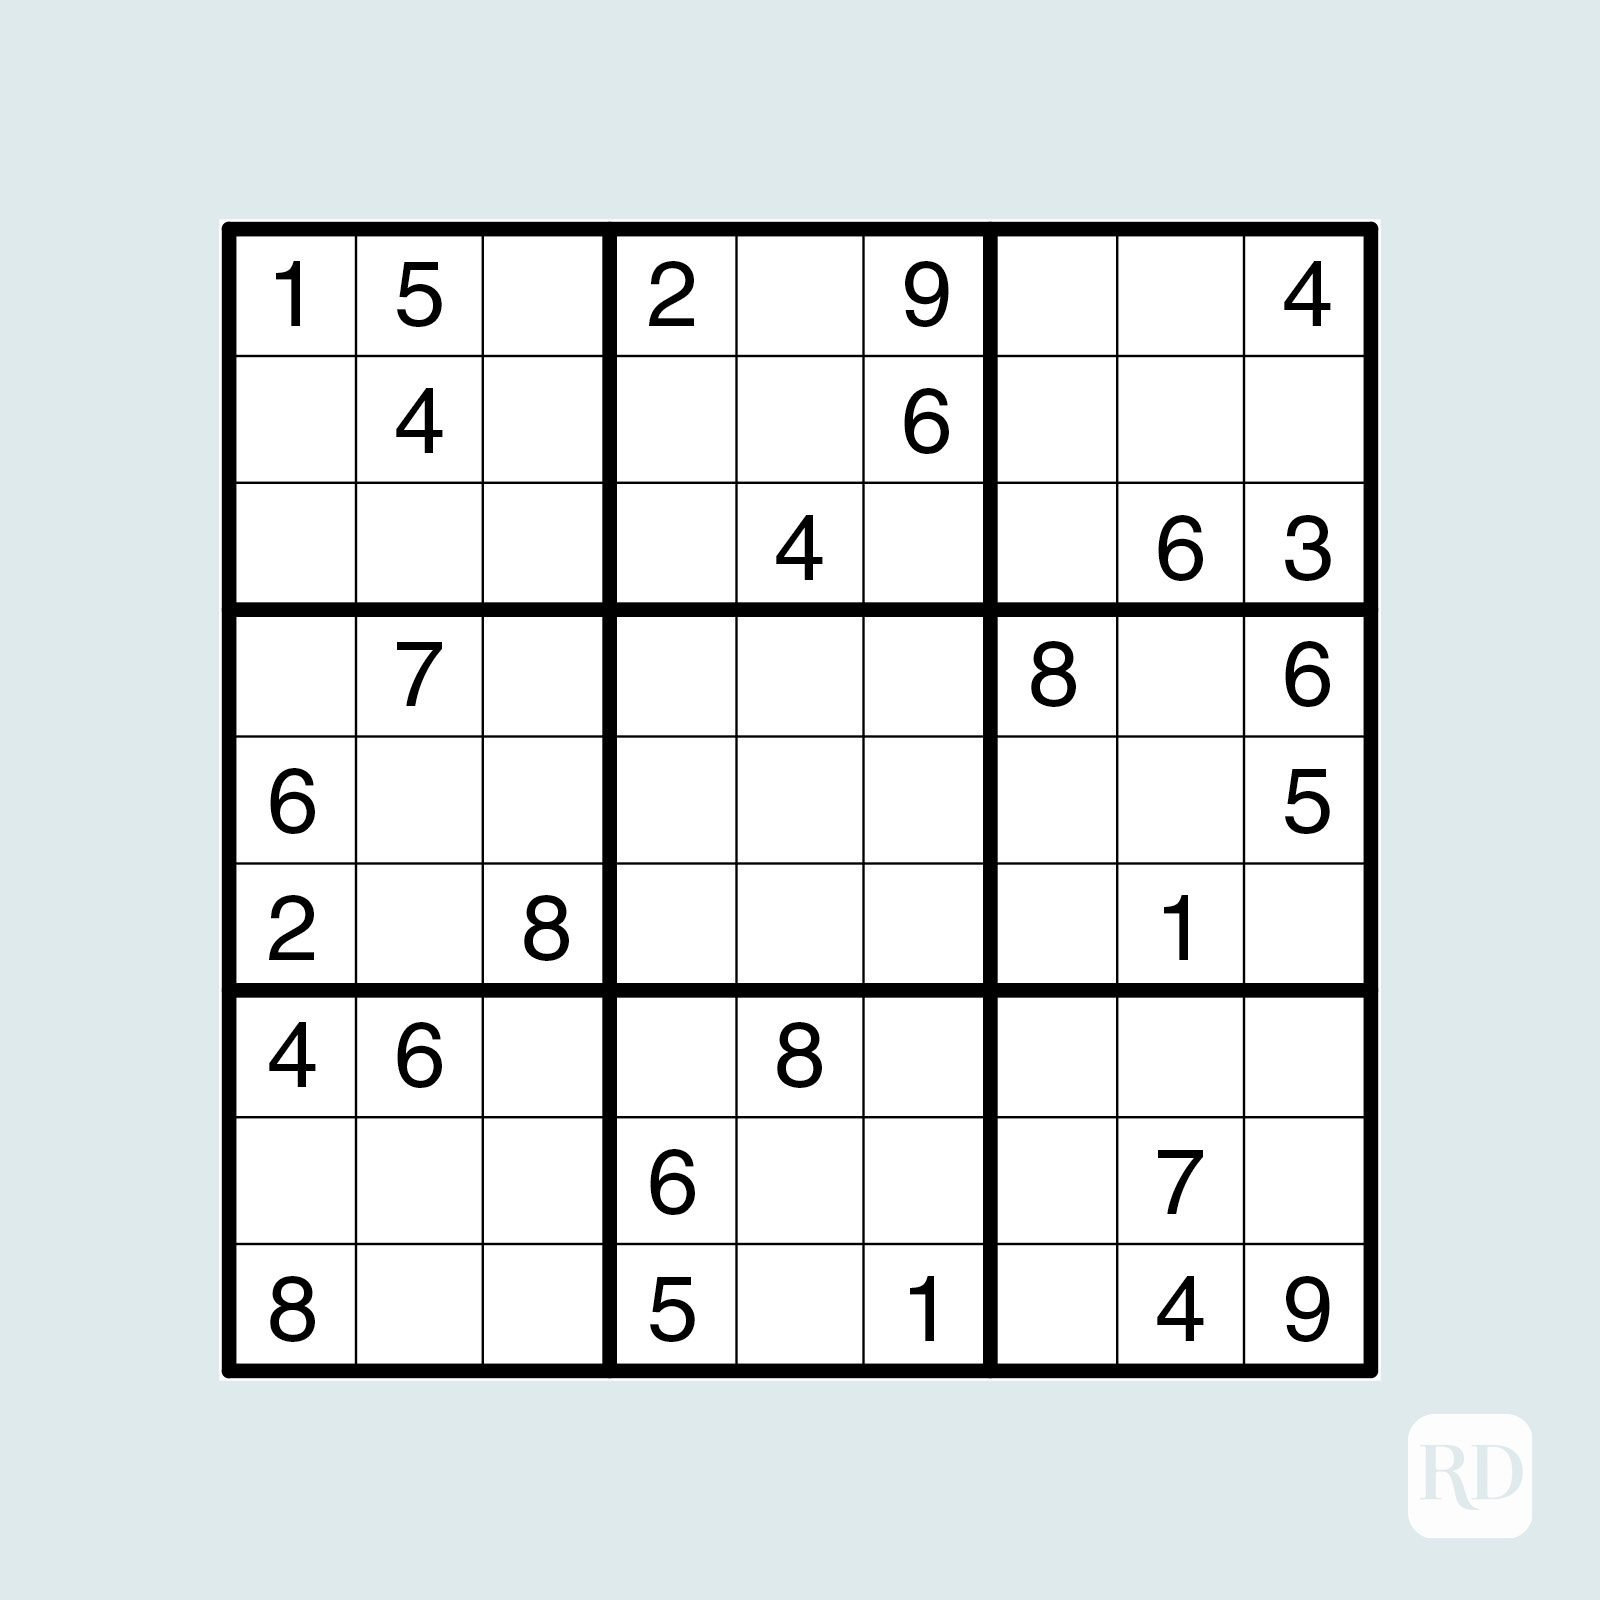 20 Free Printable Sudoku Puzzles for All Levels Reader's Digest